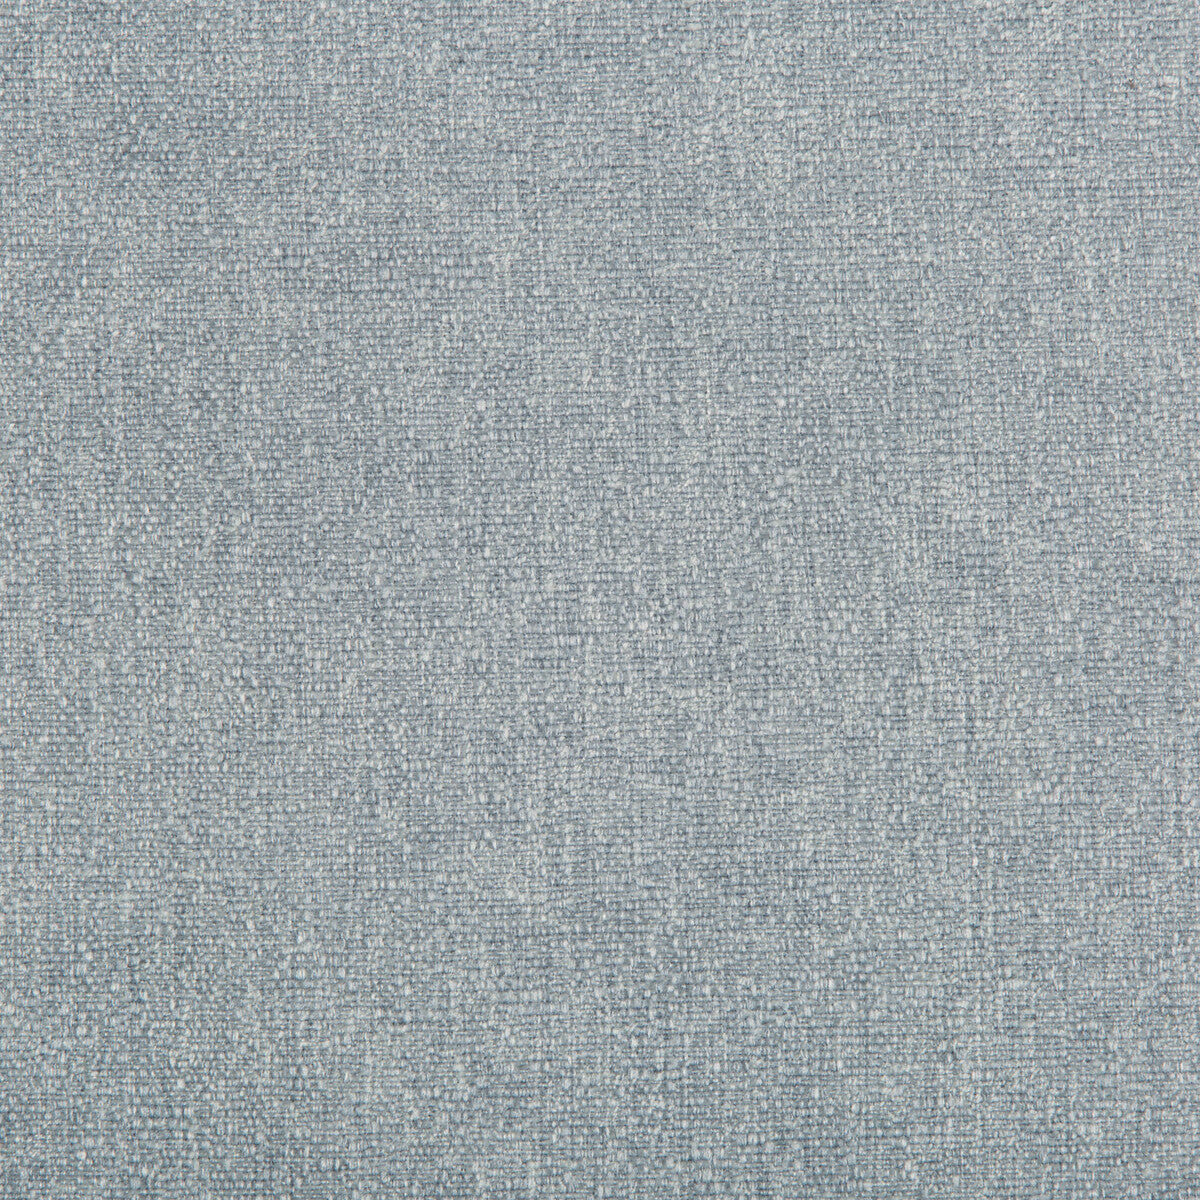 Kravet Smart fabric in 35391-15 color - pattern 35391.15.0 - by Kravet Smart in the Performance Crypton Home collection